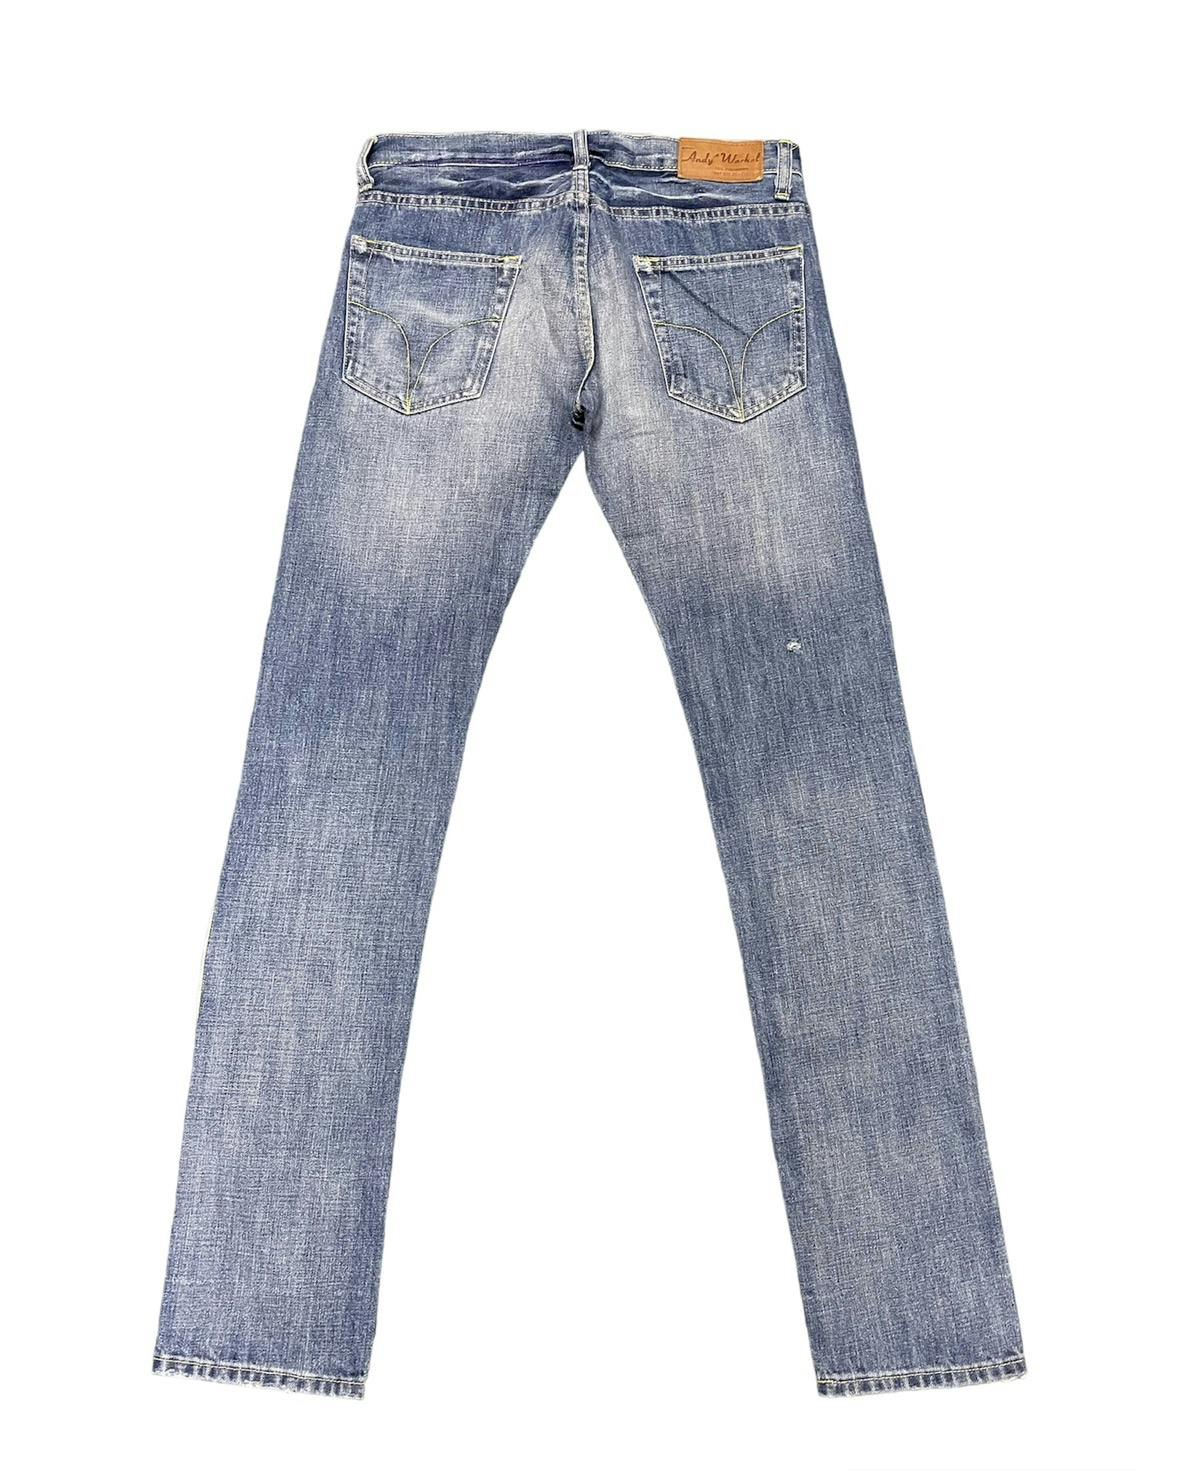 Andy warhol x hysteric glamour distressed jeans - 2